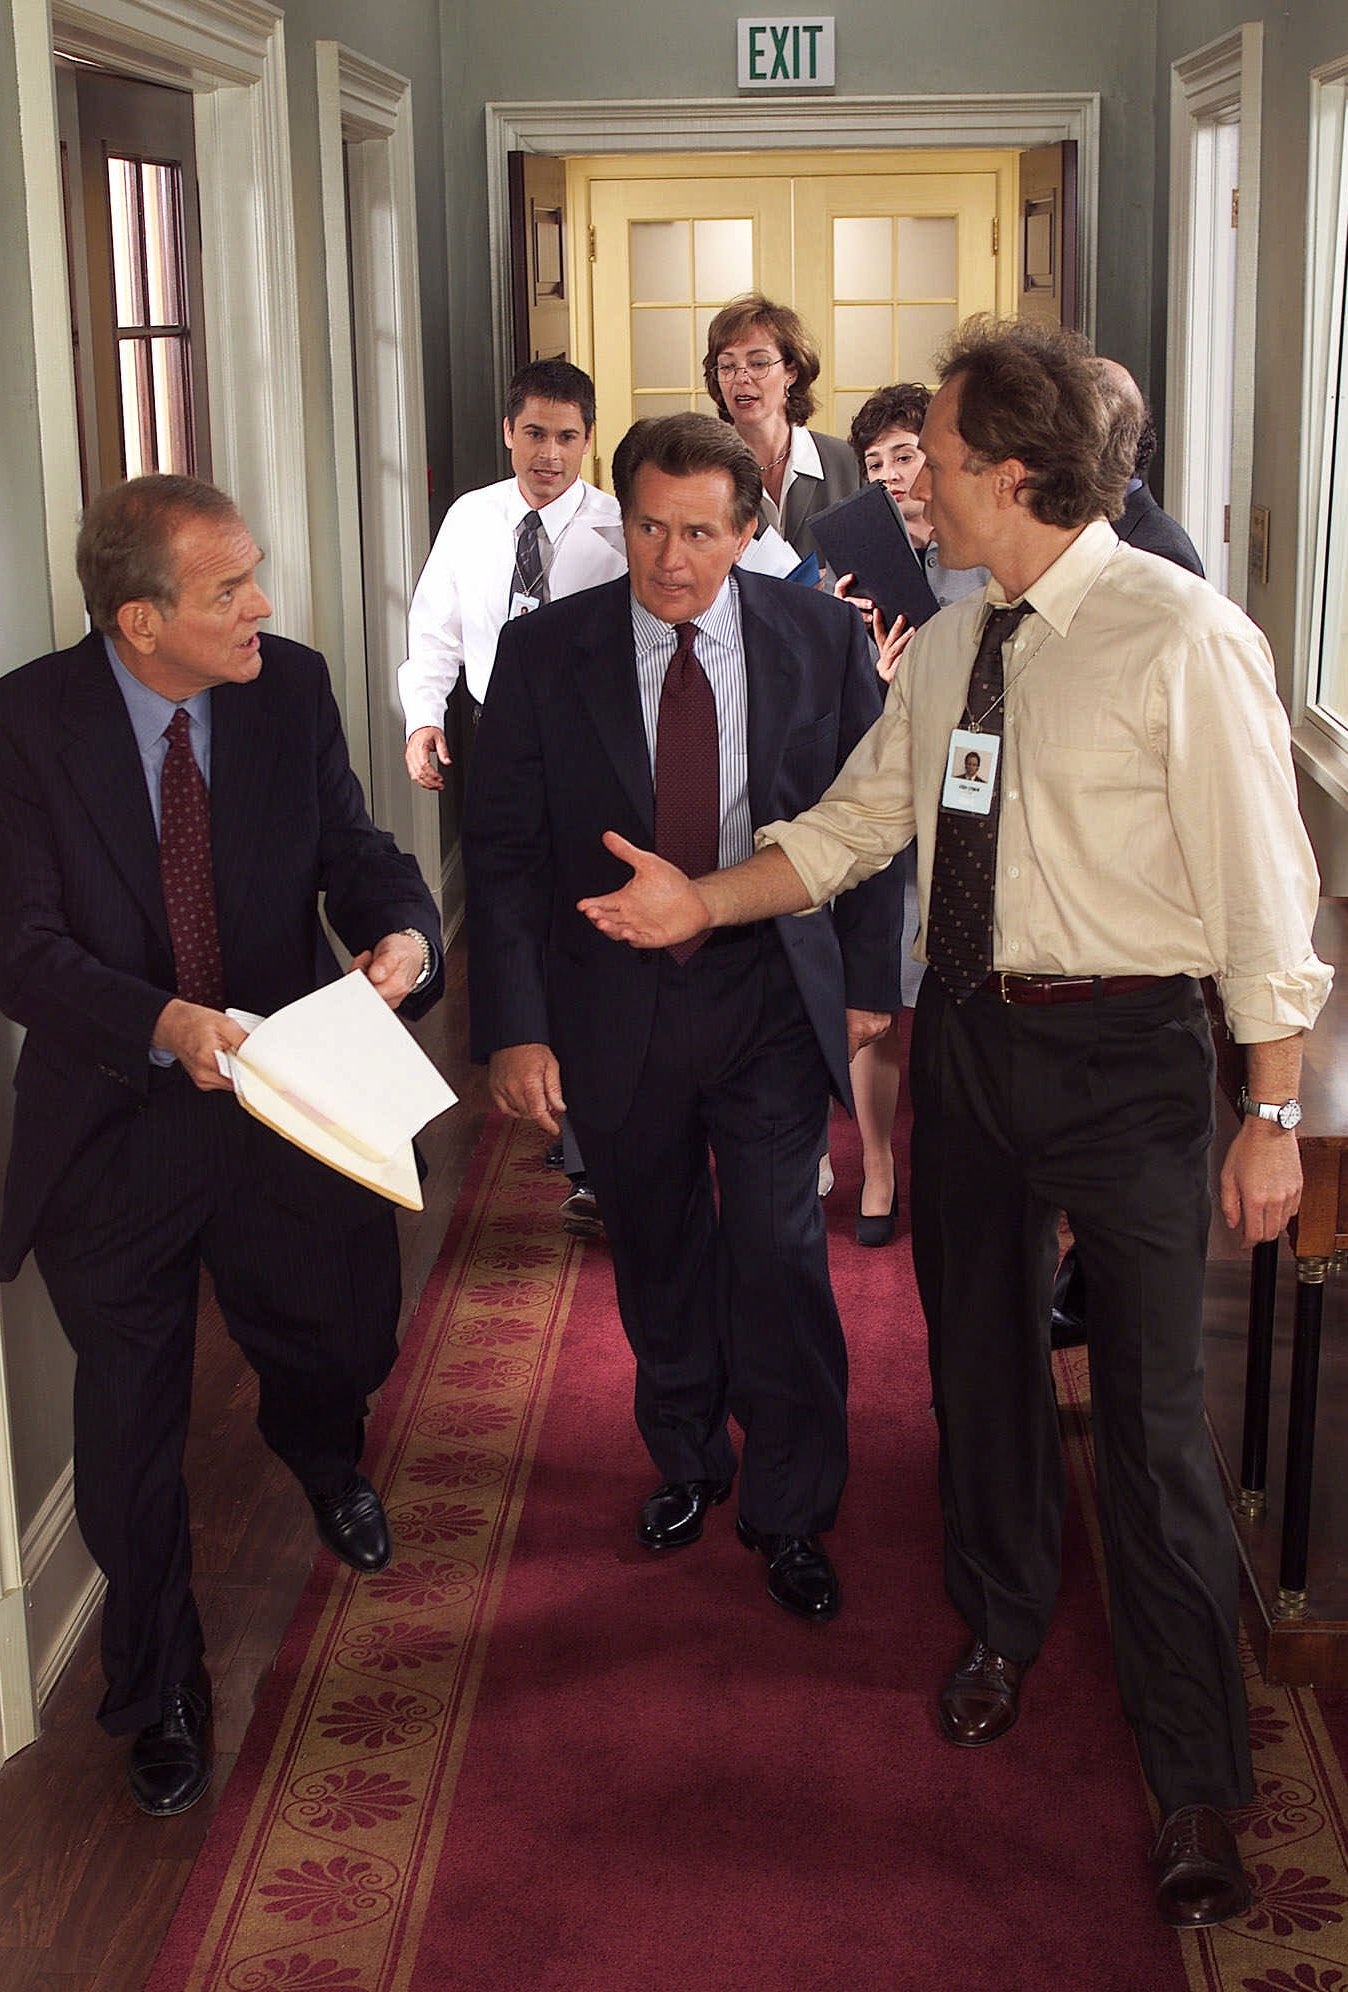 The West Wing (TV Series): Leo McGarry - the chief of staff, Jed Bartlet - the President, Josh Lyman - the deputy chief of staff. 1350x2000 HD Wallpaper.